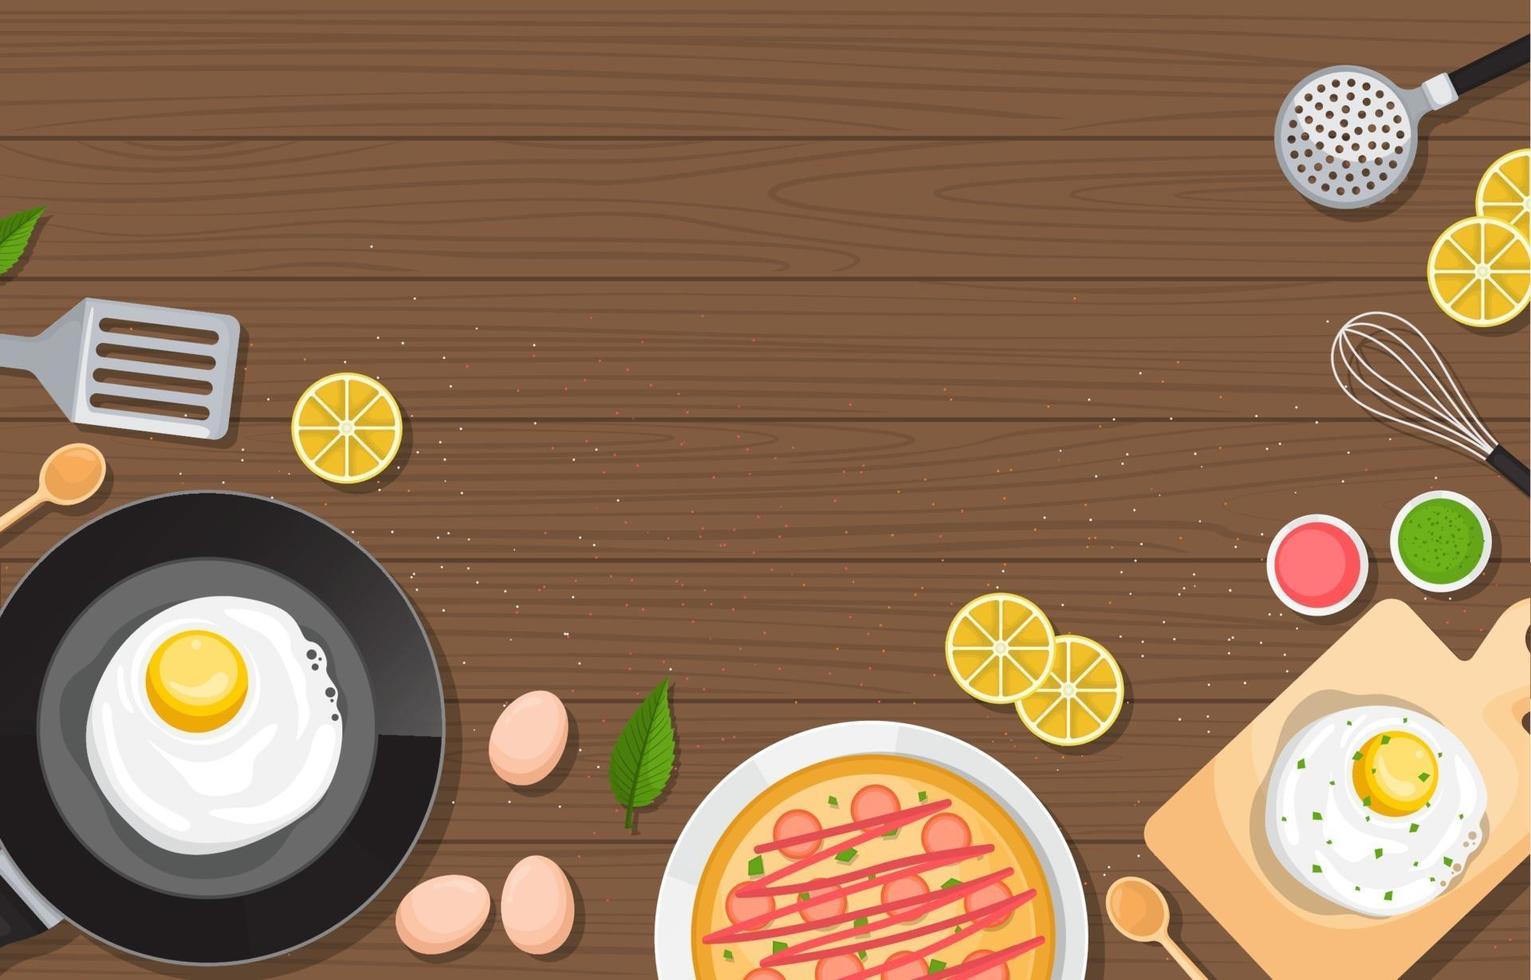 Eggs, Pizza, and Cooking Tools on Wooden Table vector